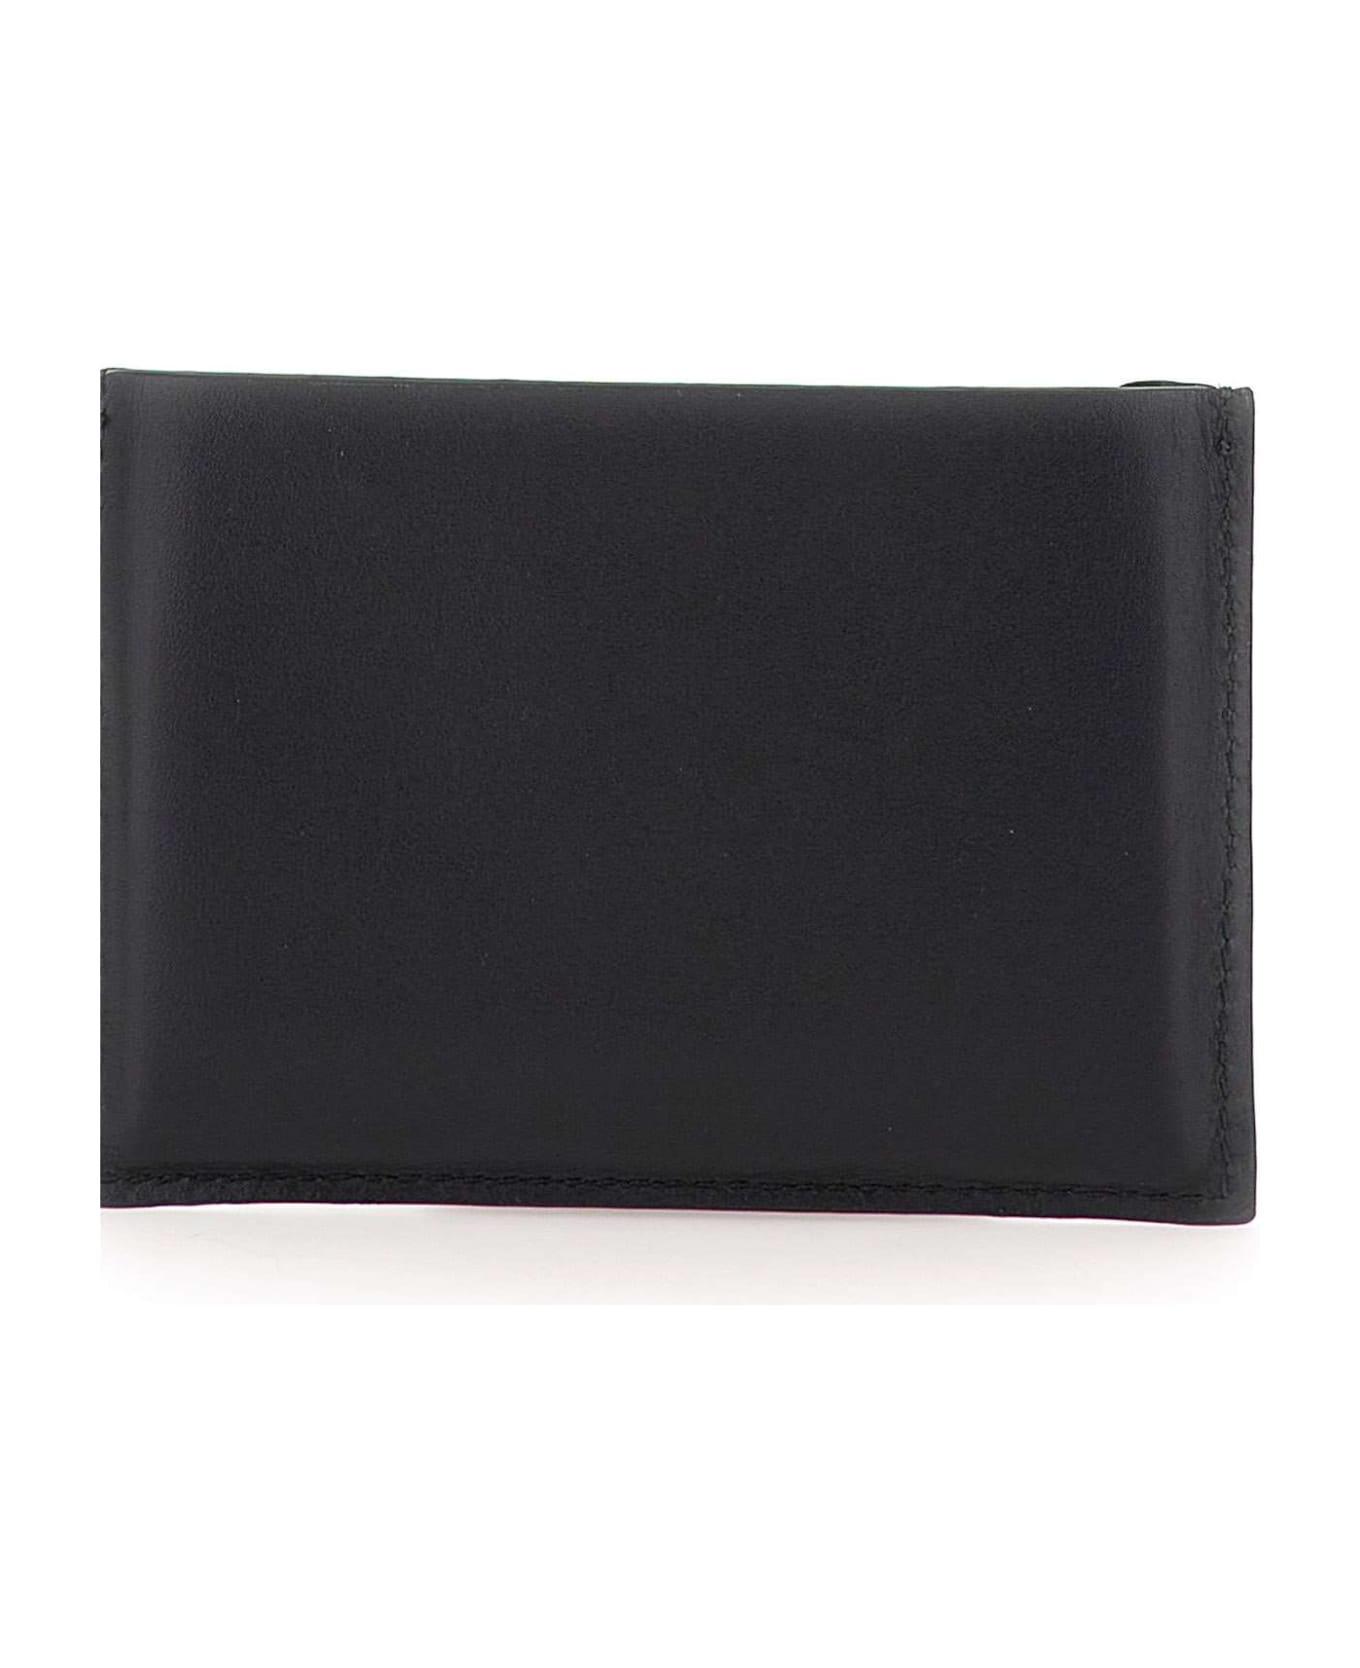 Paul Smith Card Holder Leather Wallet - BLACK